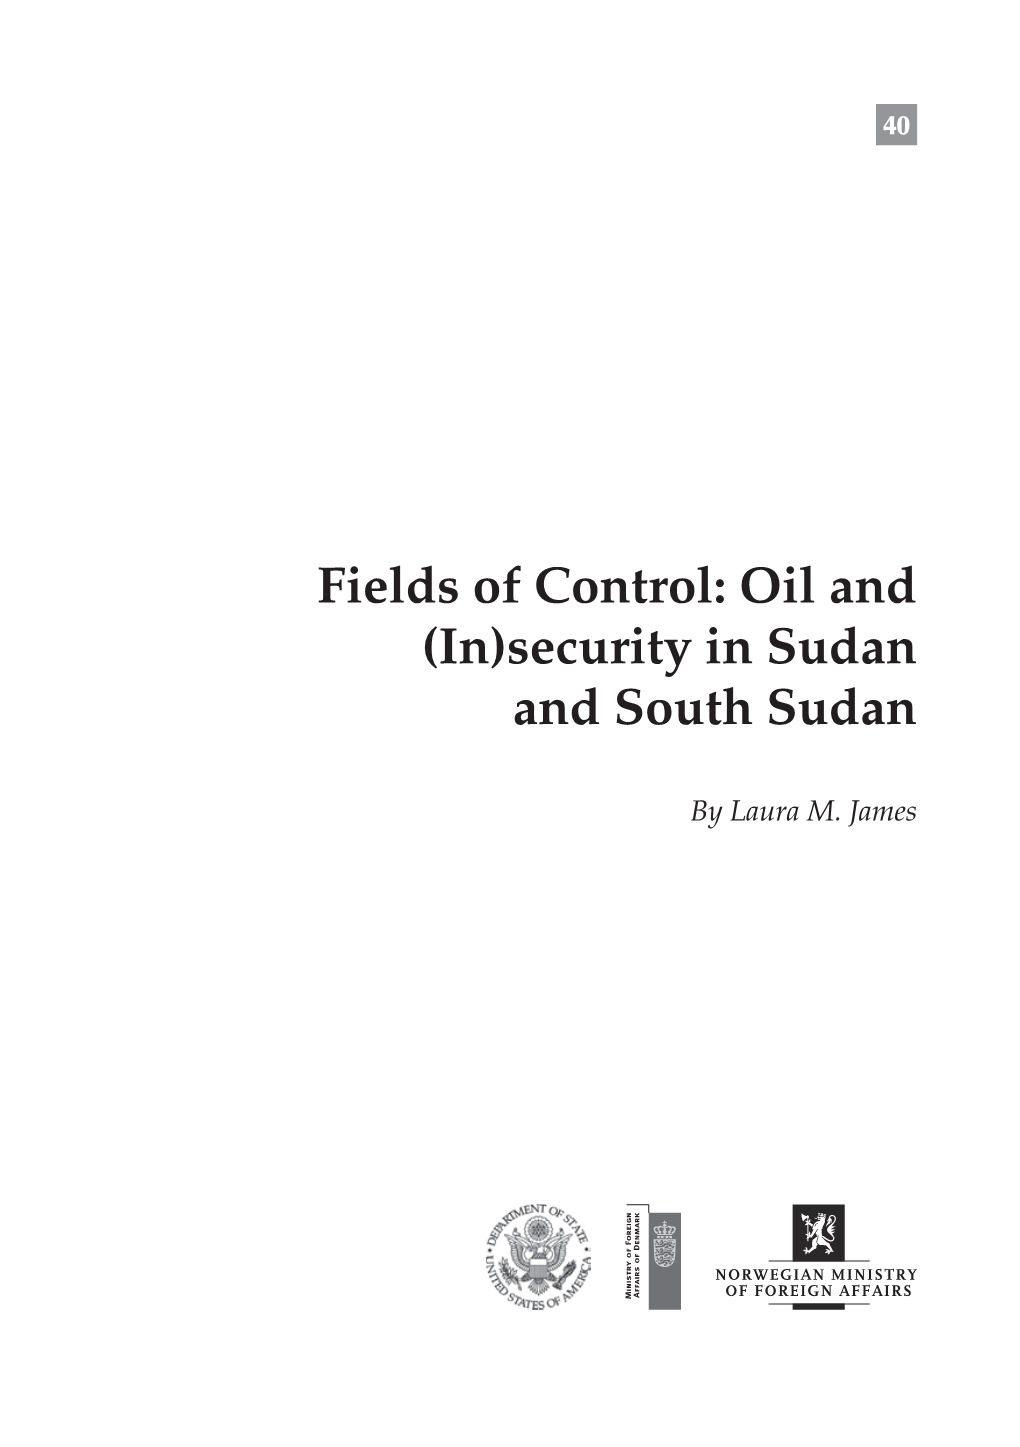 Fields of Control: Oil and (In)Security in Sudan and South Sudan